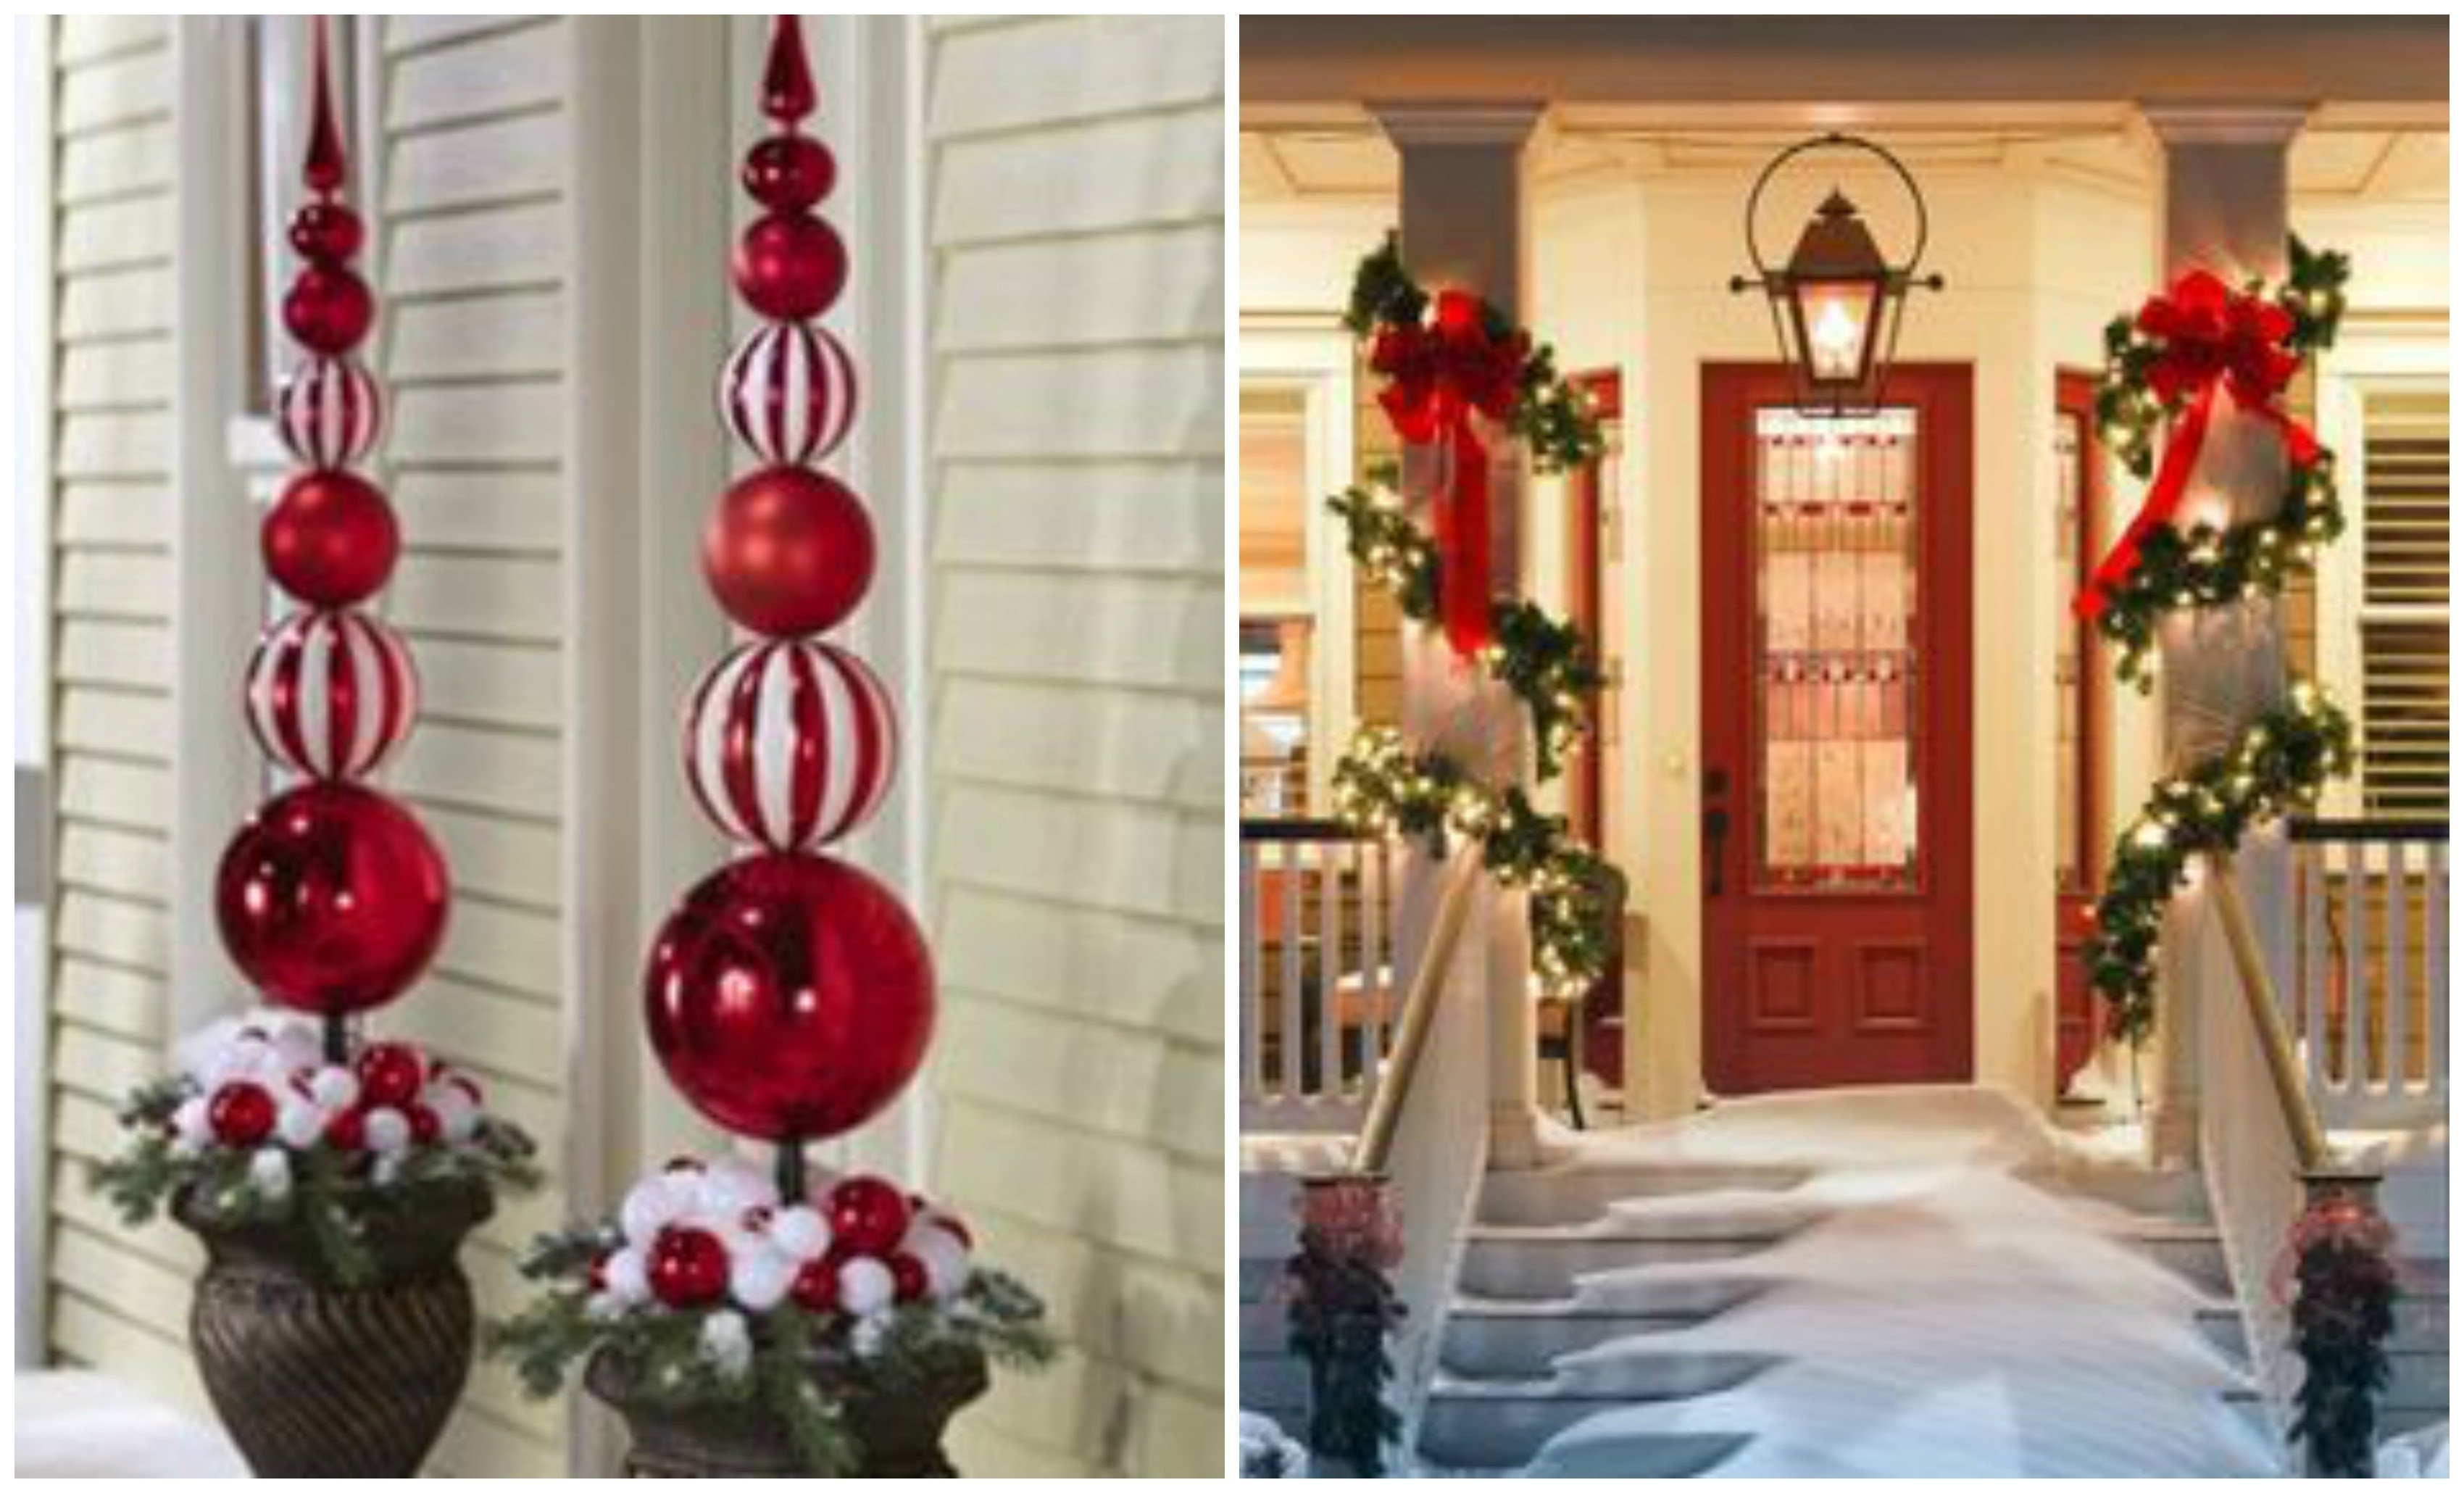 10 Most Recommended Christmas Decorating Ideas For Outside outside holiday christmas decorating ideas youtube 1 2022